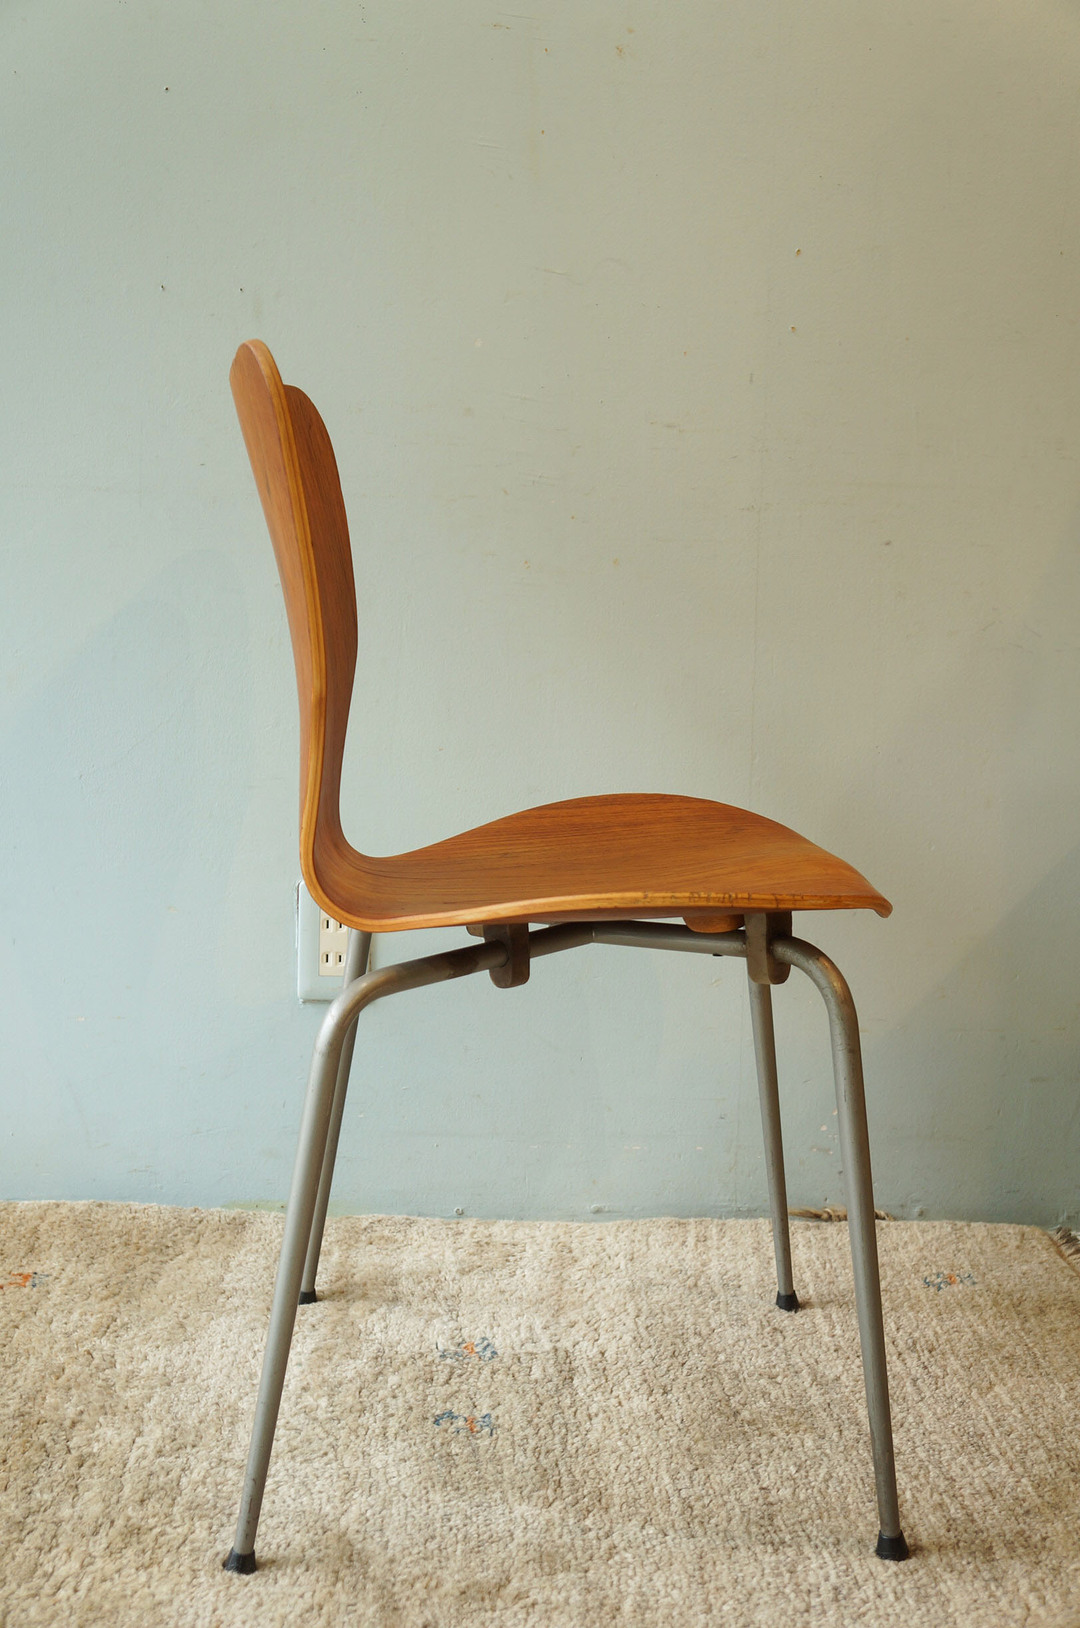 Danish Vintage Teak Plywood Stacking Chair MH Stålmøbler/デンマークヴィンテージ スタッキングチェア チーク材 プライウッド 椅子 ミッドセンチュリー モダン 北欧家具 9